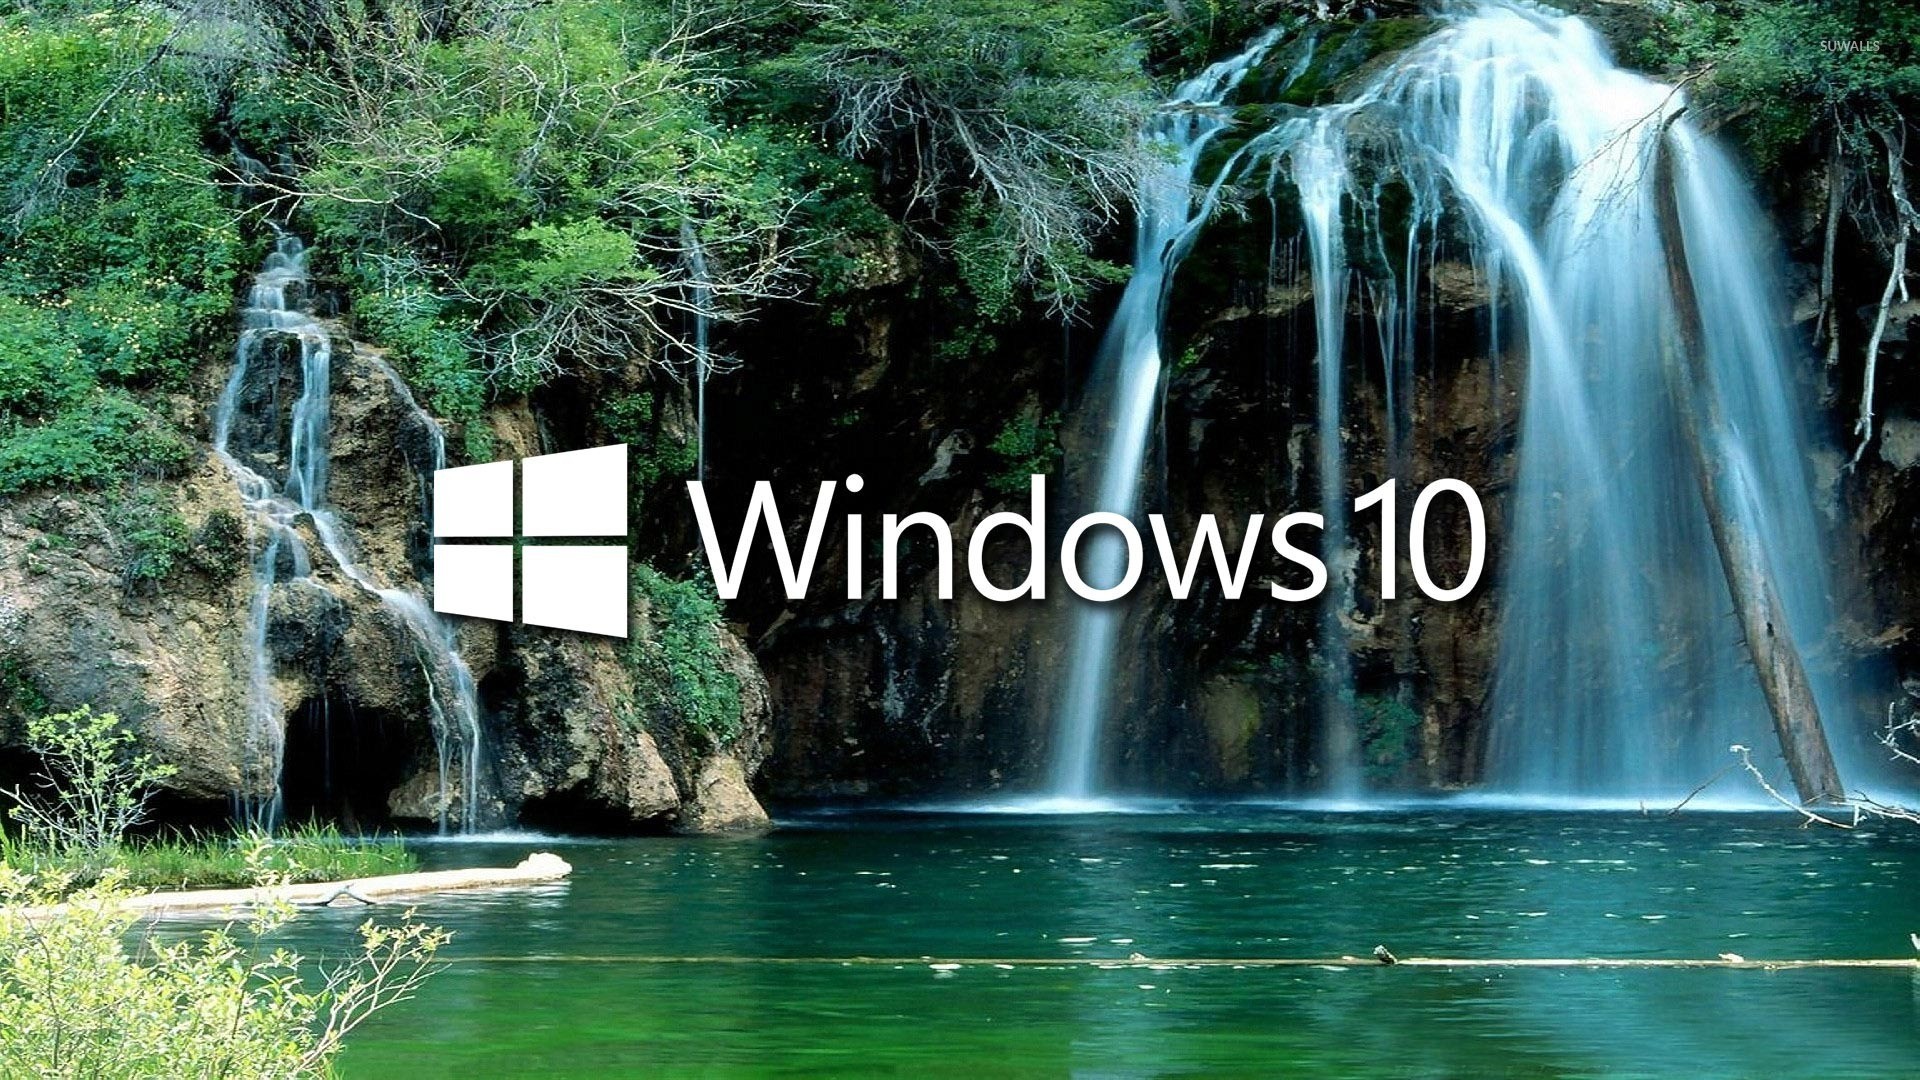 1920x1080 Windows 10 over the waterfall logo with text wallpaper